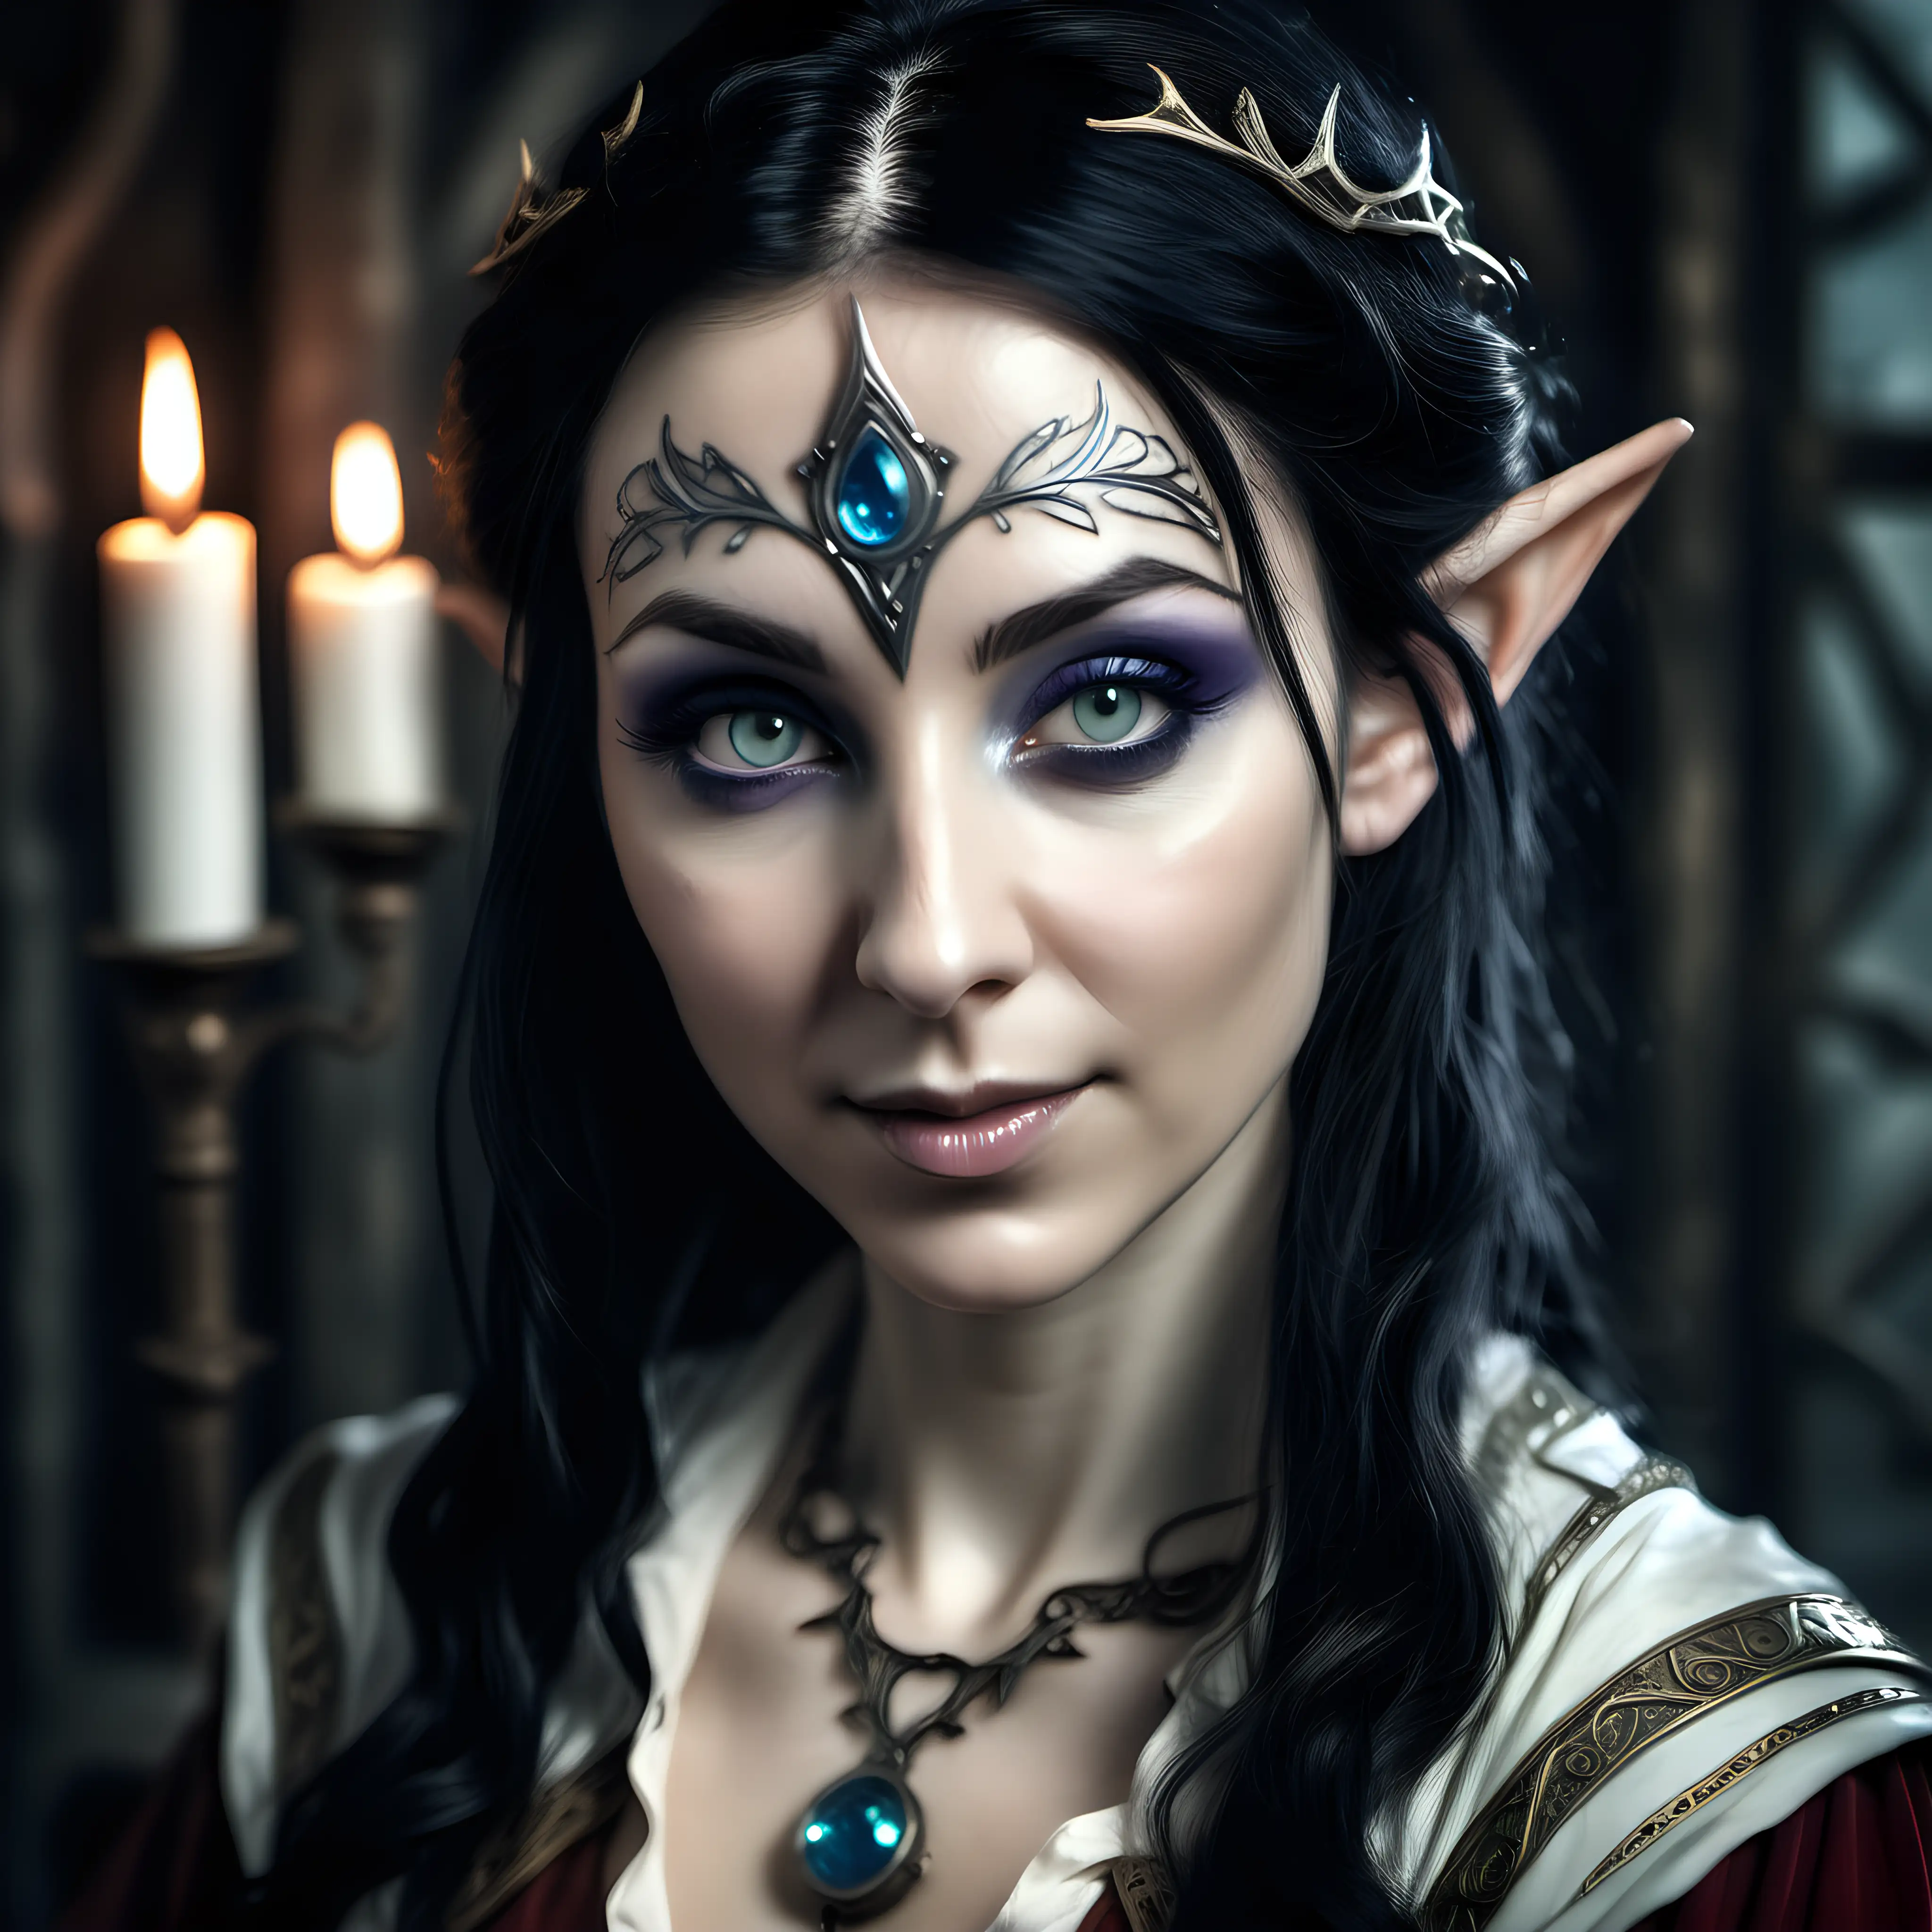 Enchanting Elven Sorceress HyperDetailed Portrait in Apothecary Ambiance